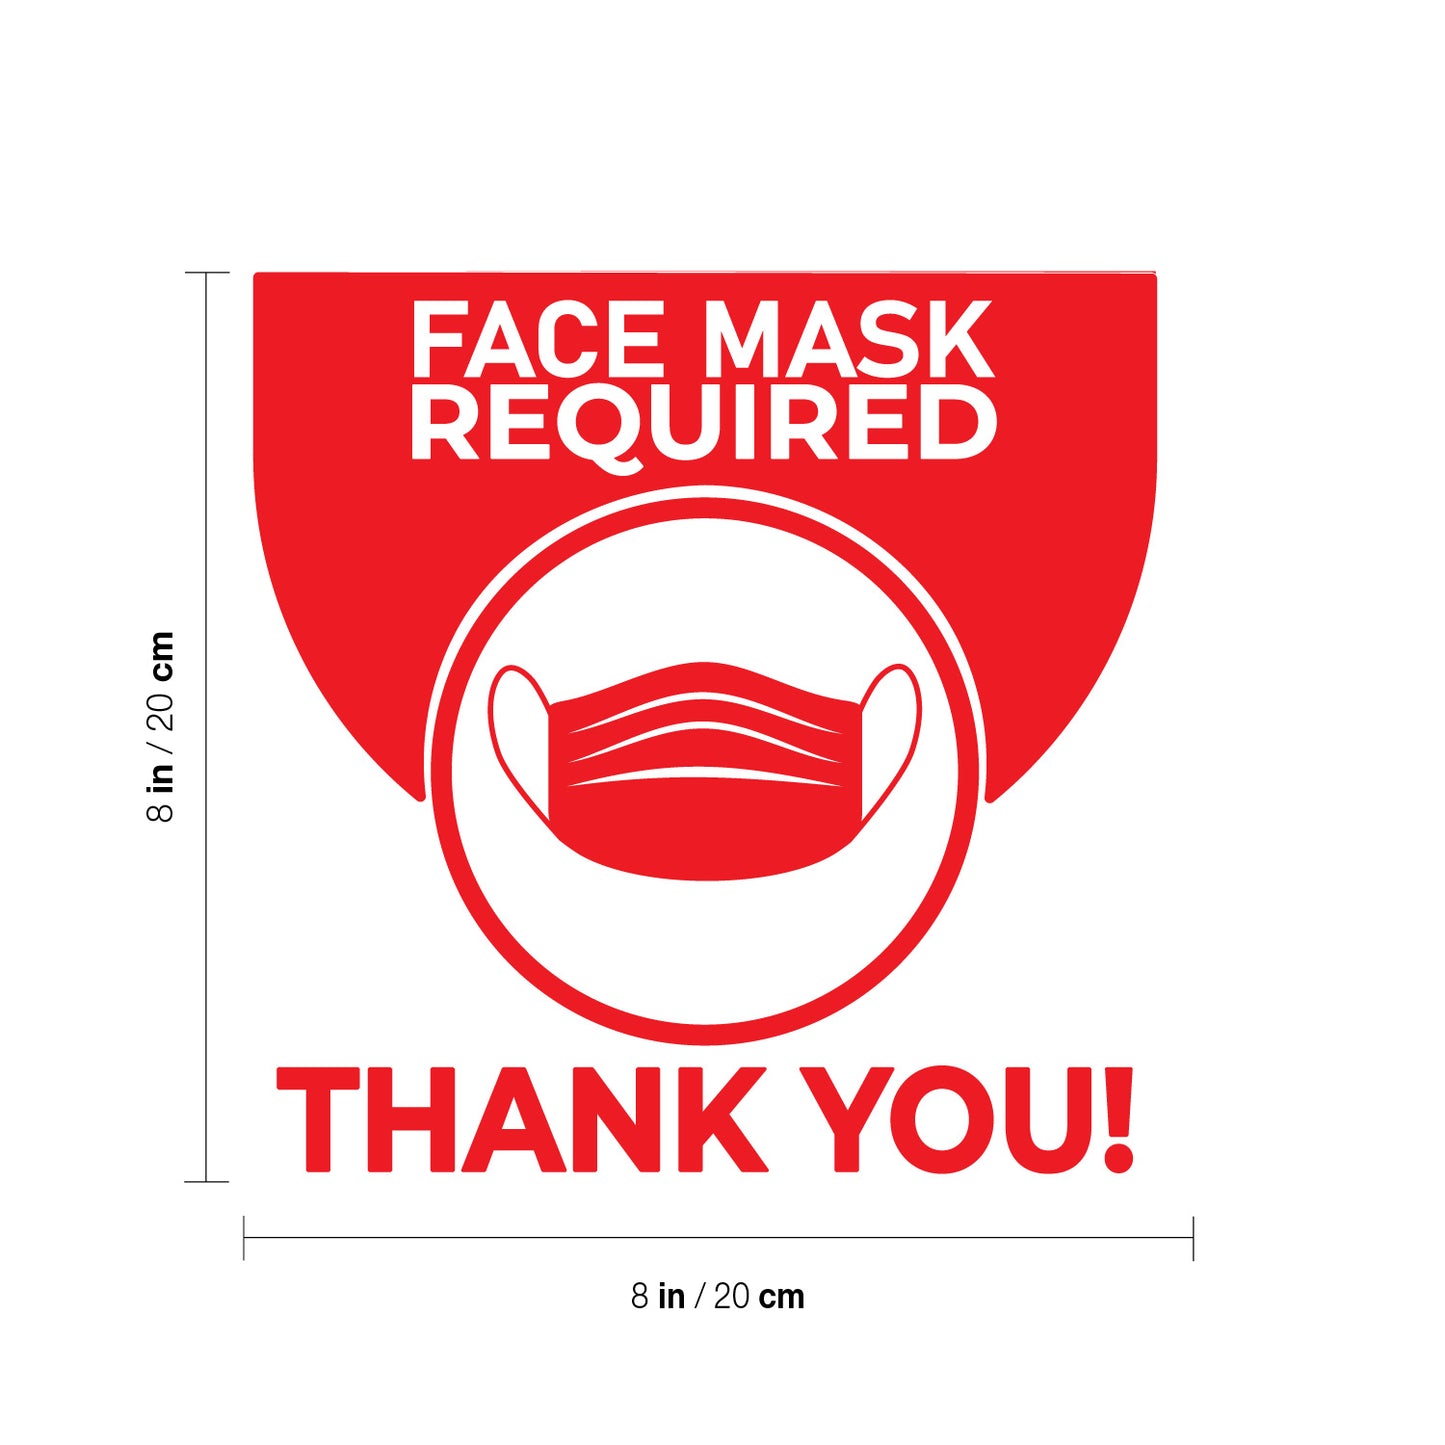 Facemask Required Thank You Decal (Red)